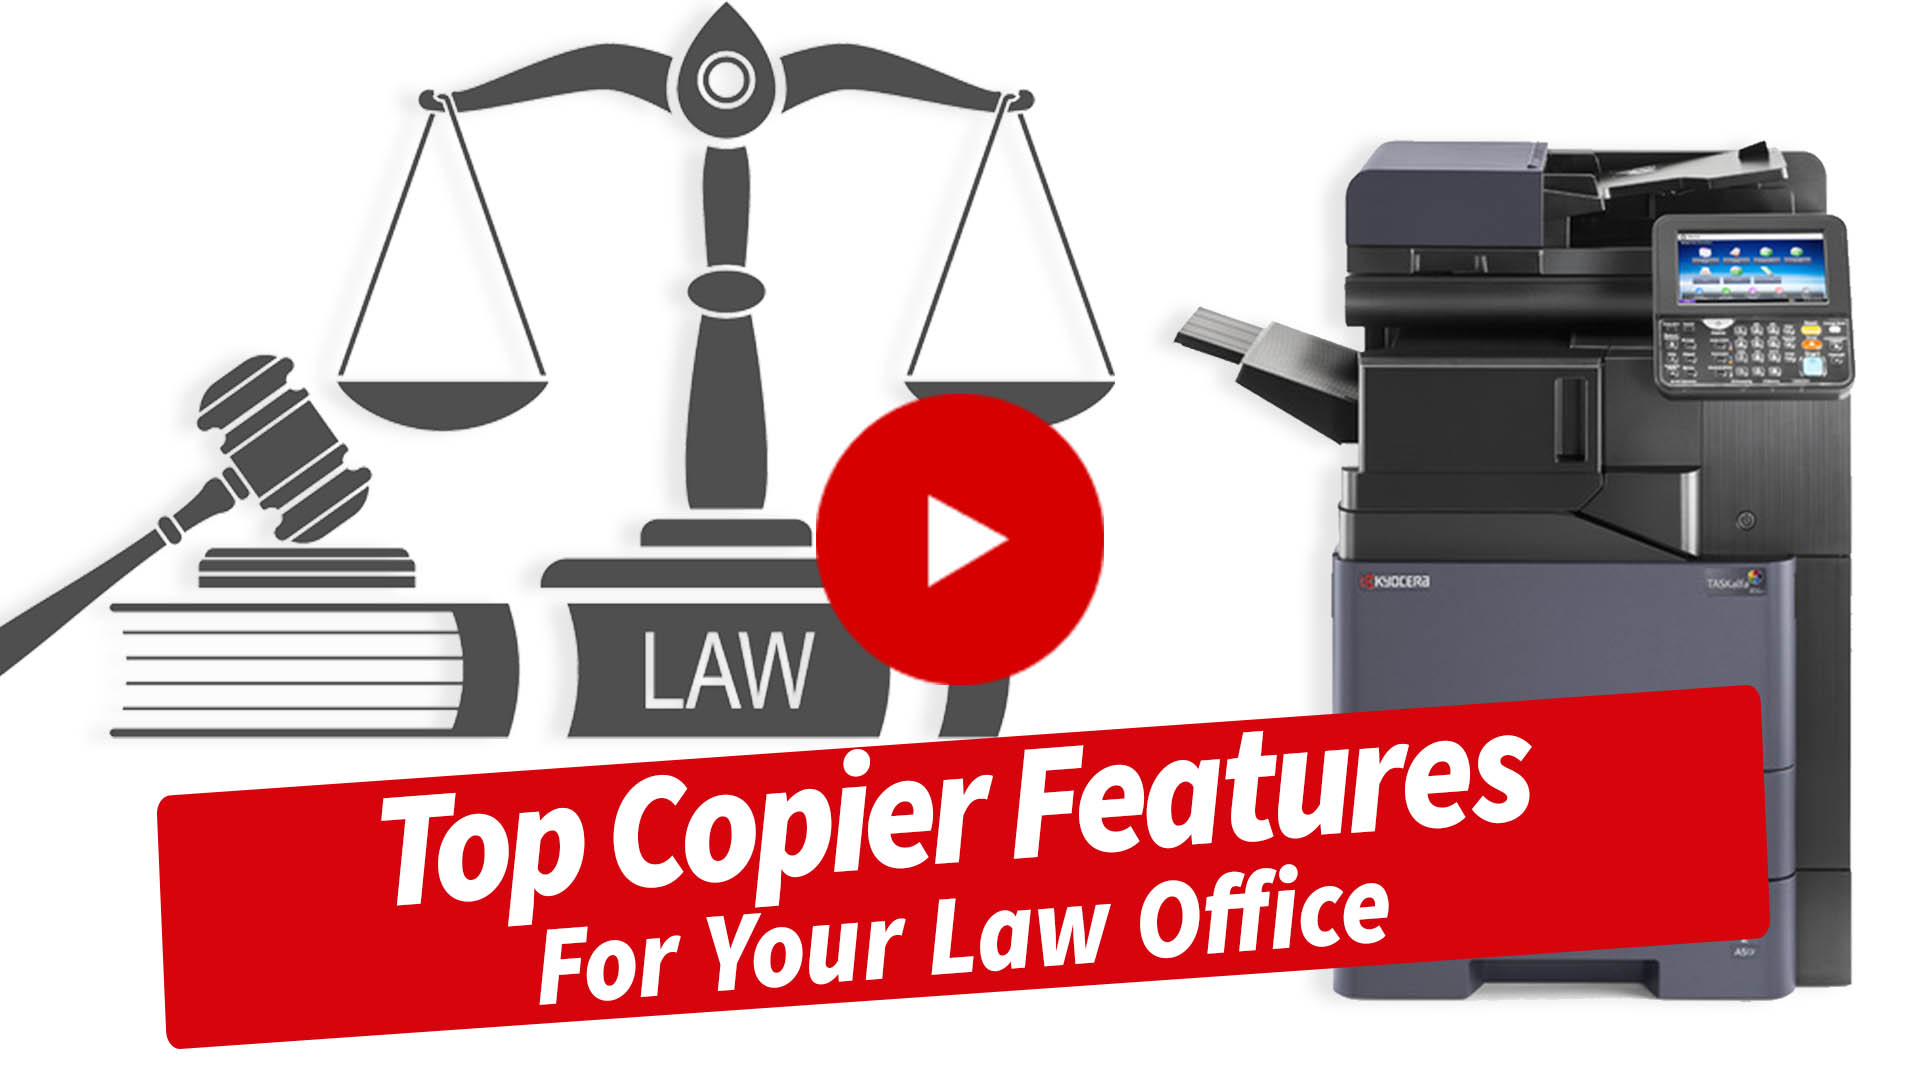 Top Copier Features For Your Law Office